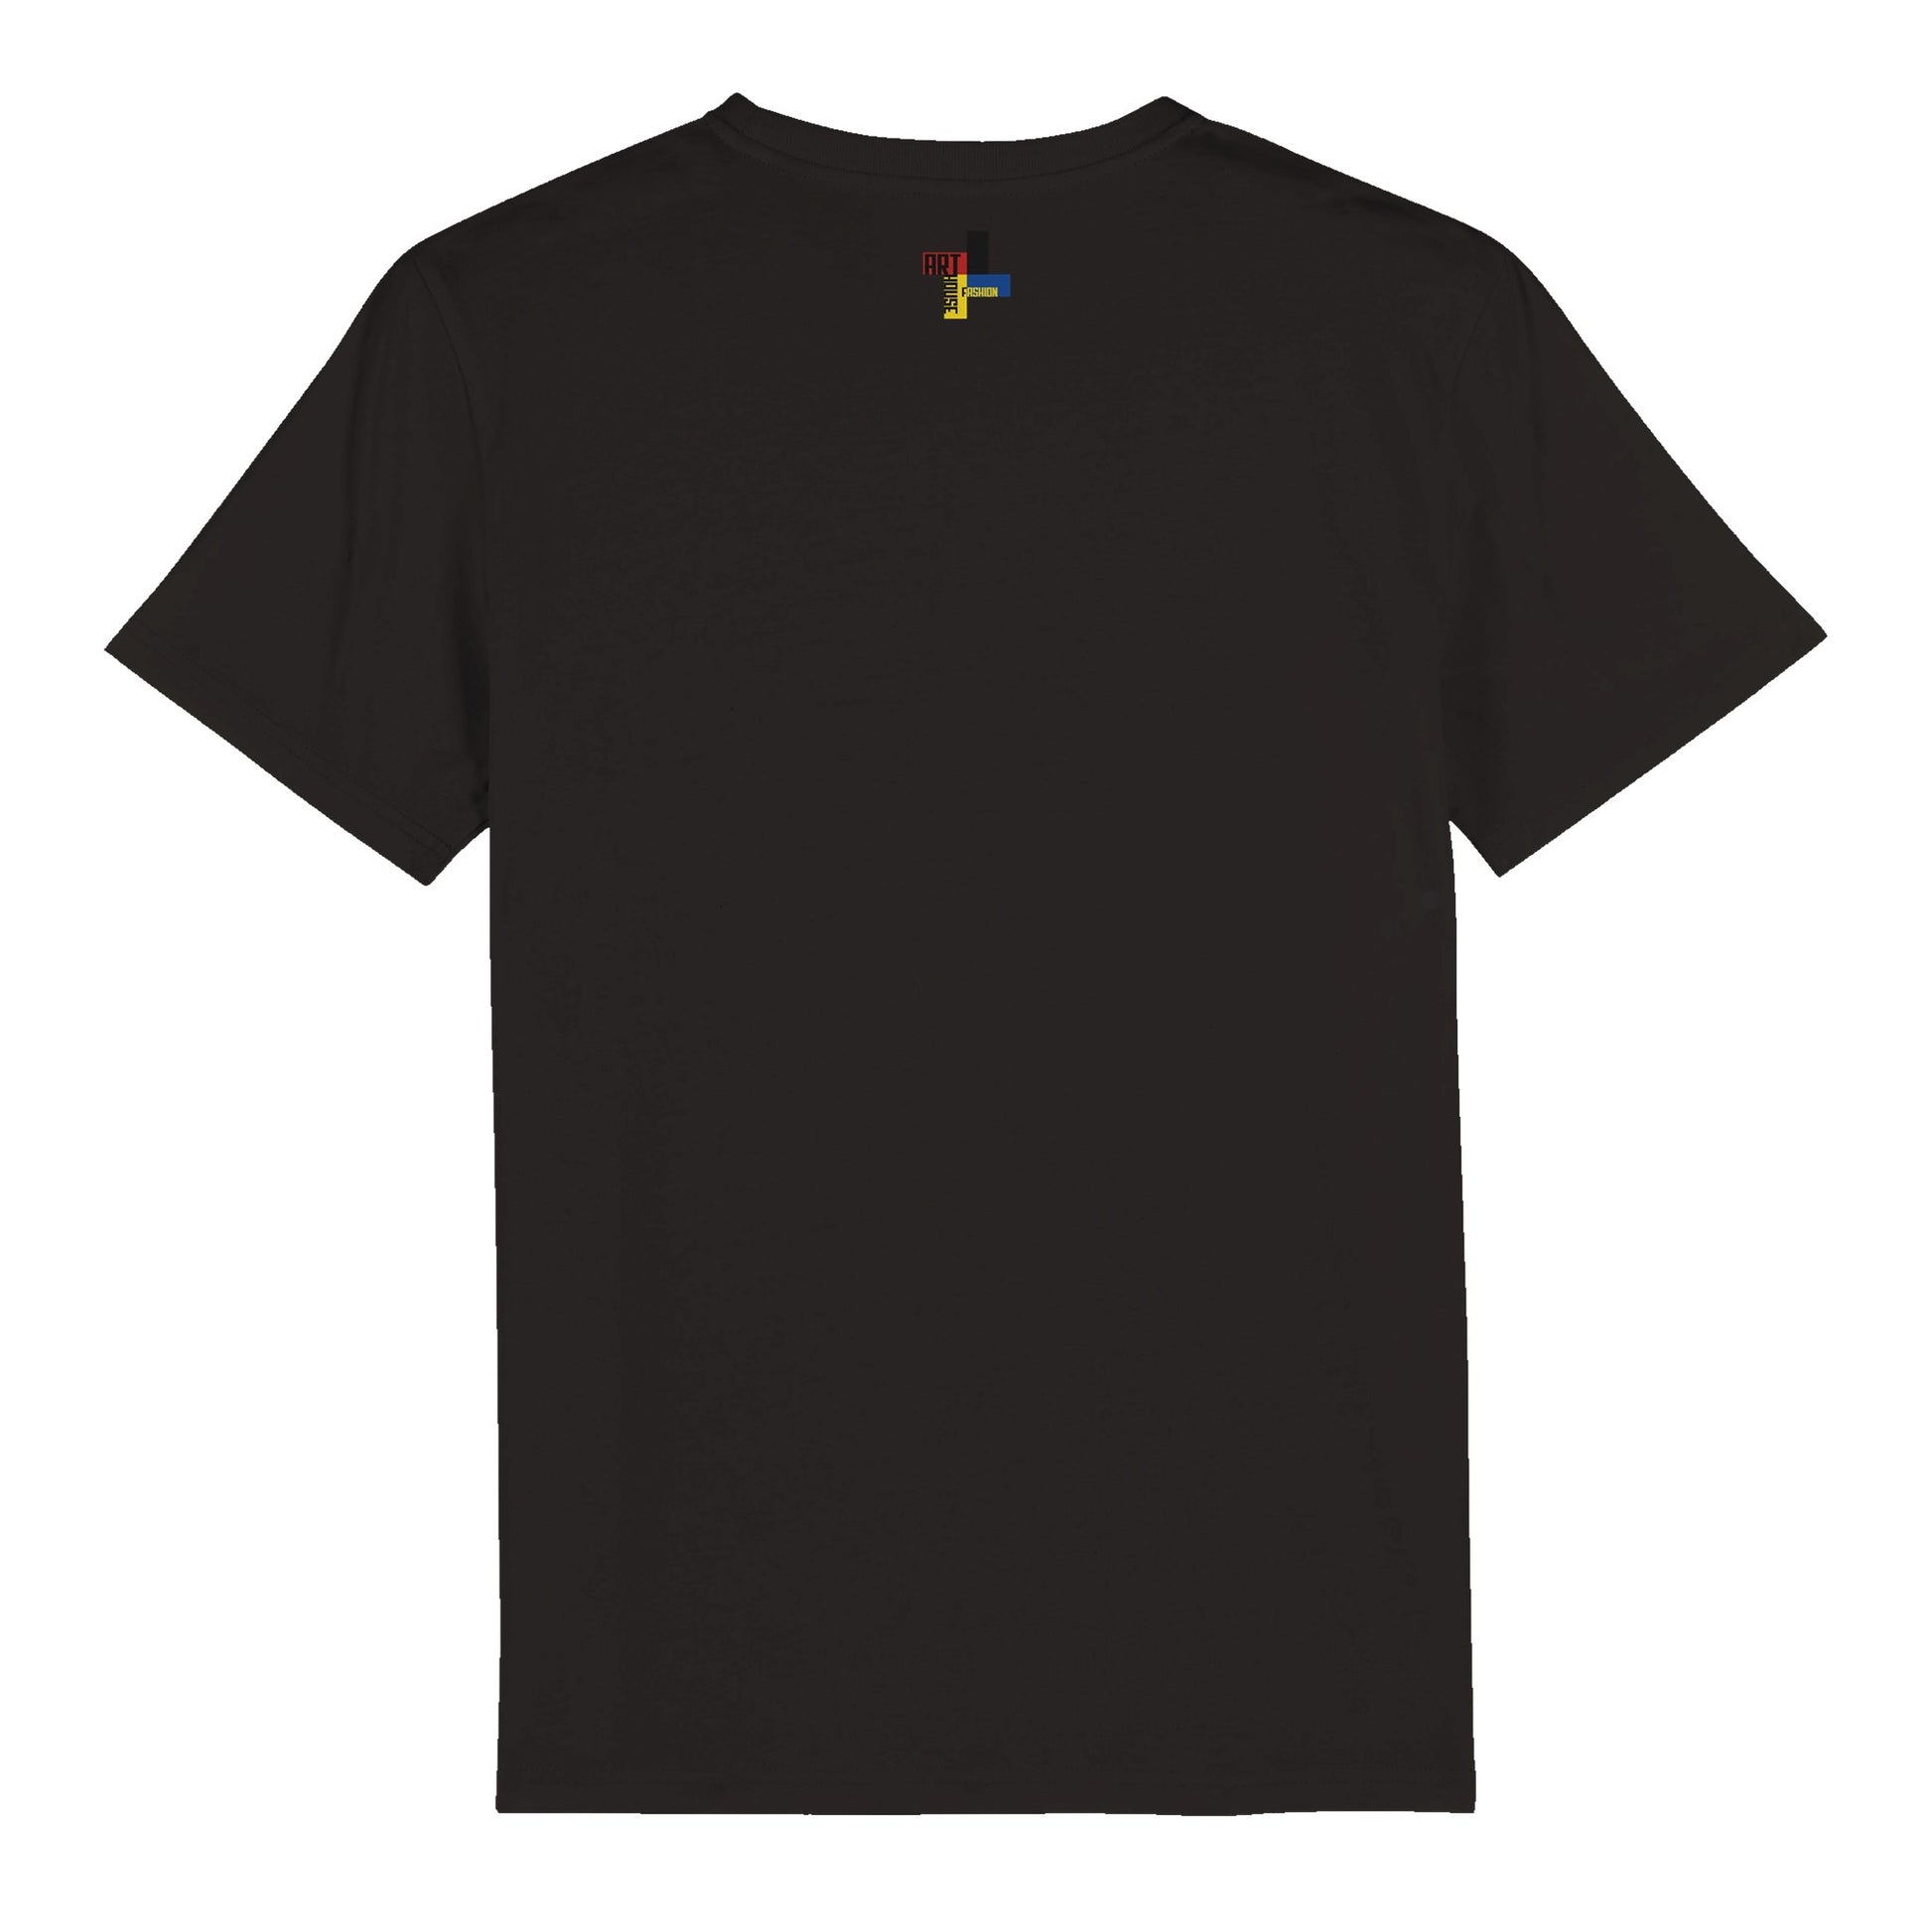 a black t - shirt with a logo on the chest